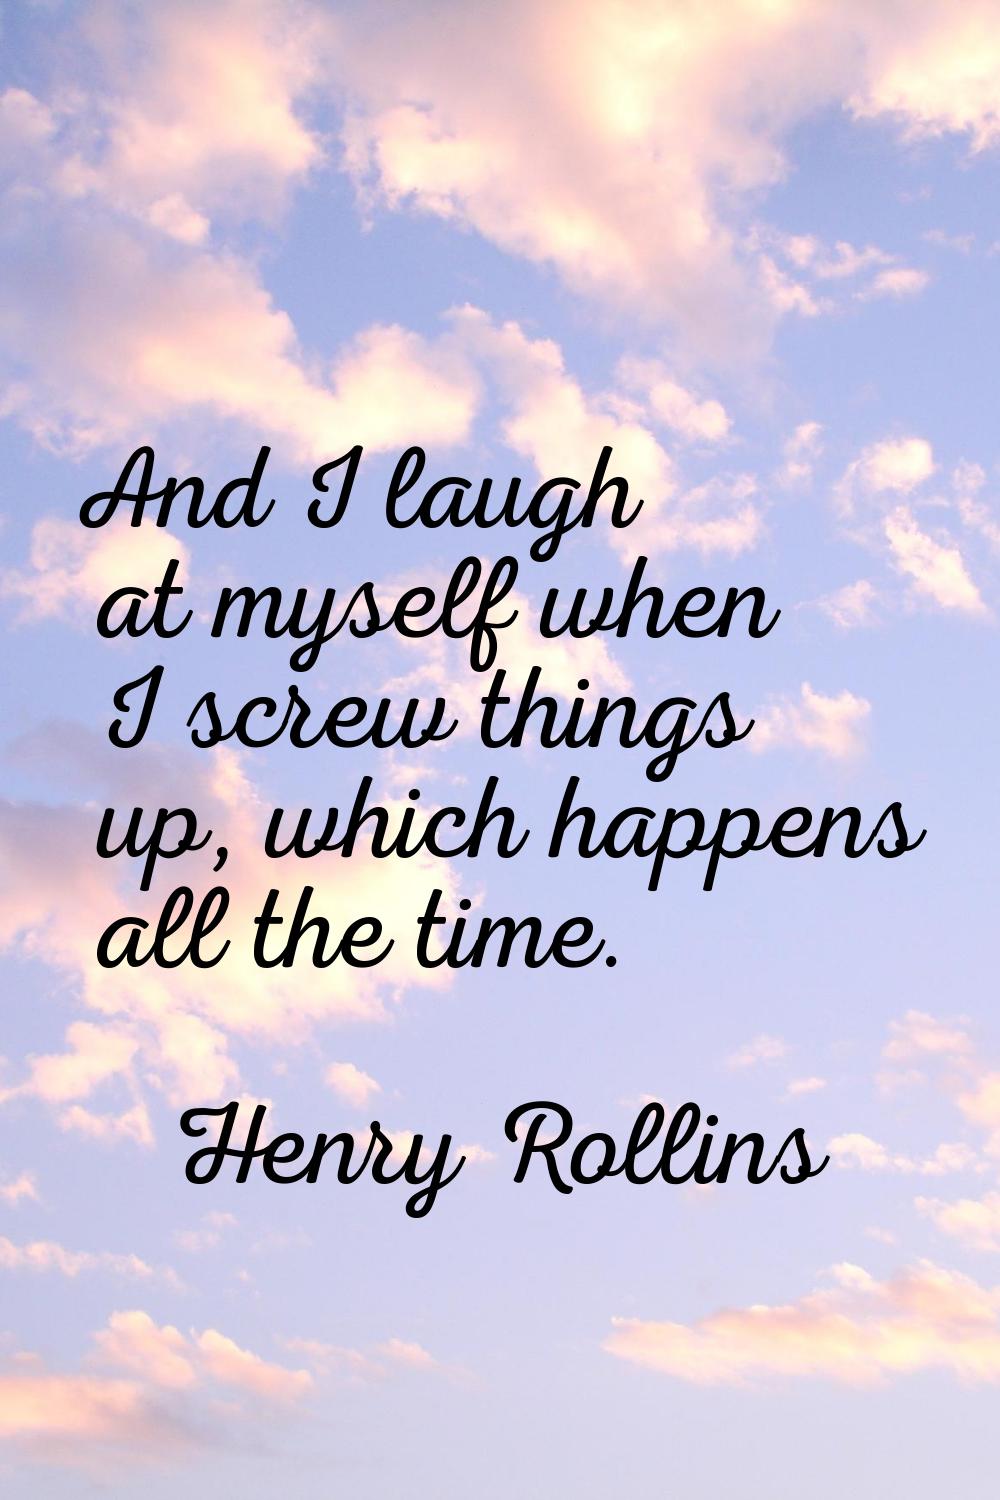 And I laugh at myself when I screw things up, which happens all the time.